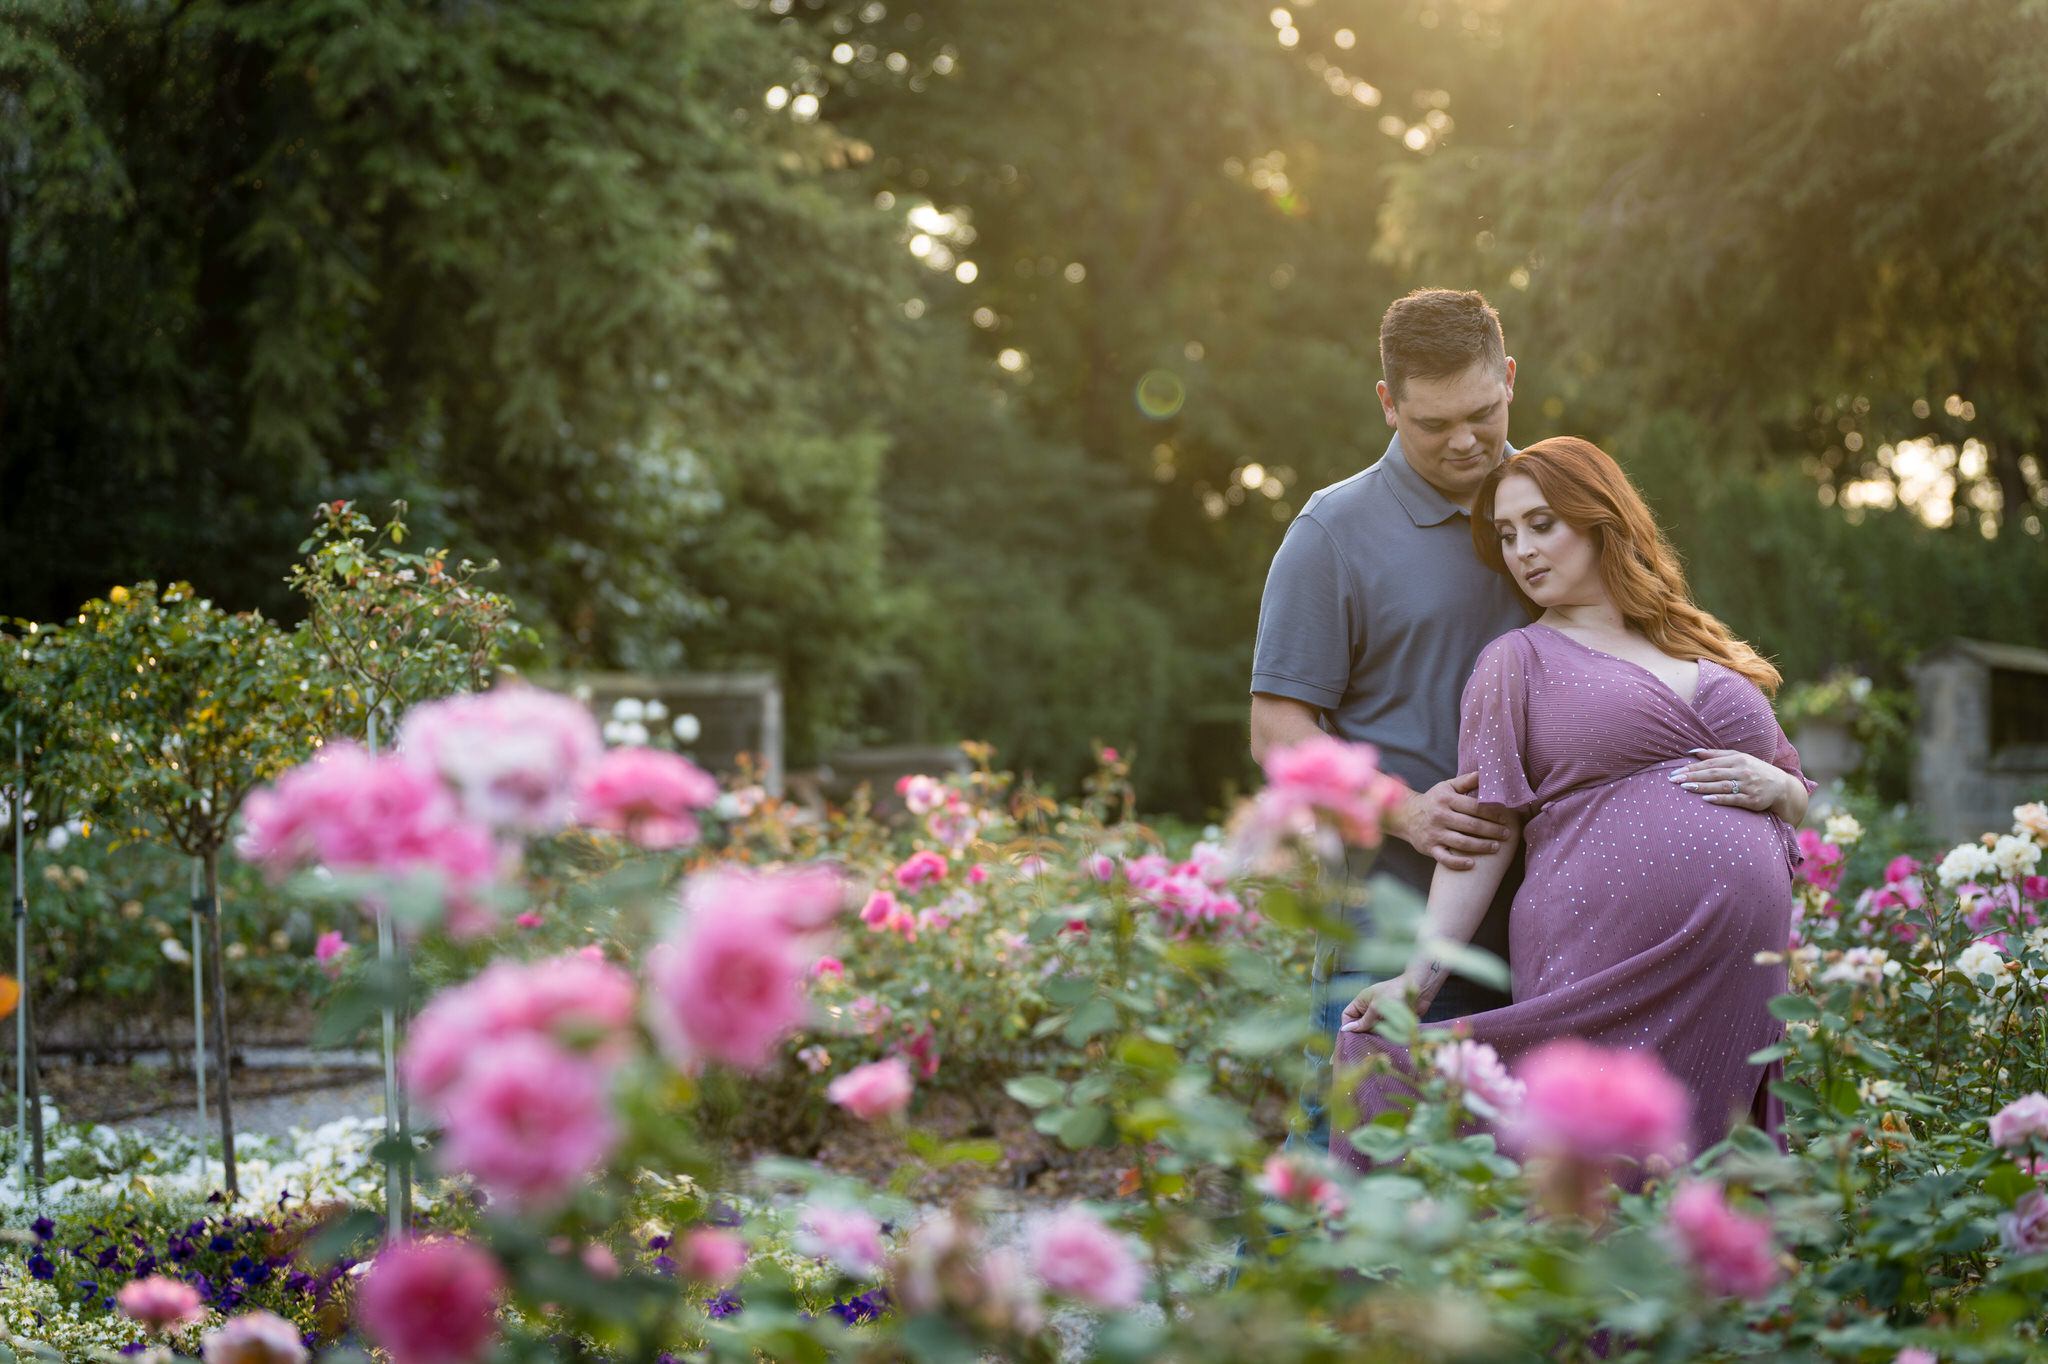 A maternity session at Edsel Ford by Brian Weitzel Photography.